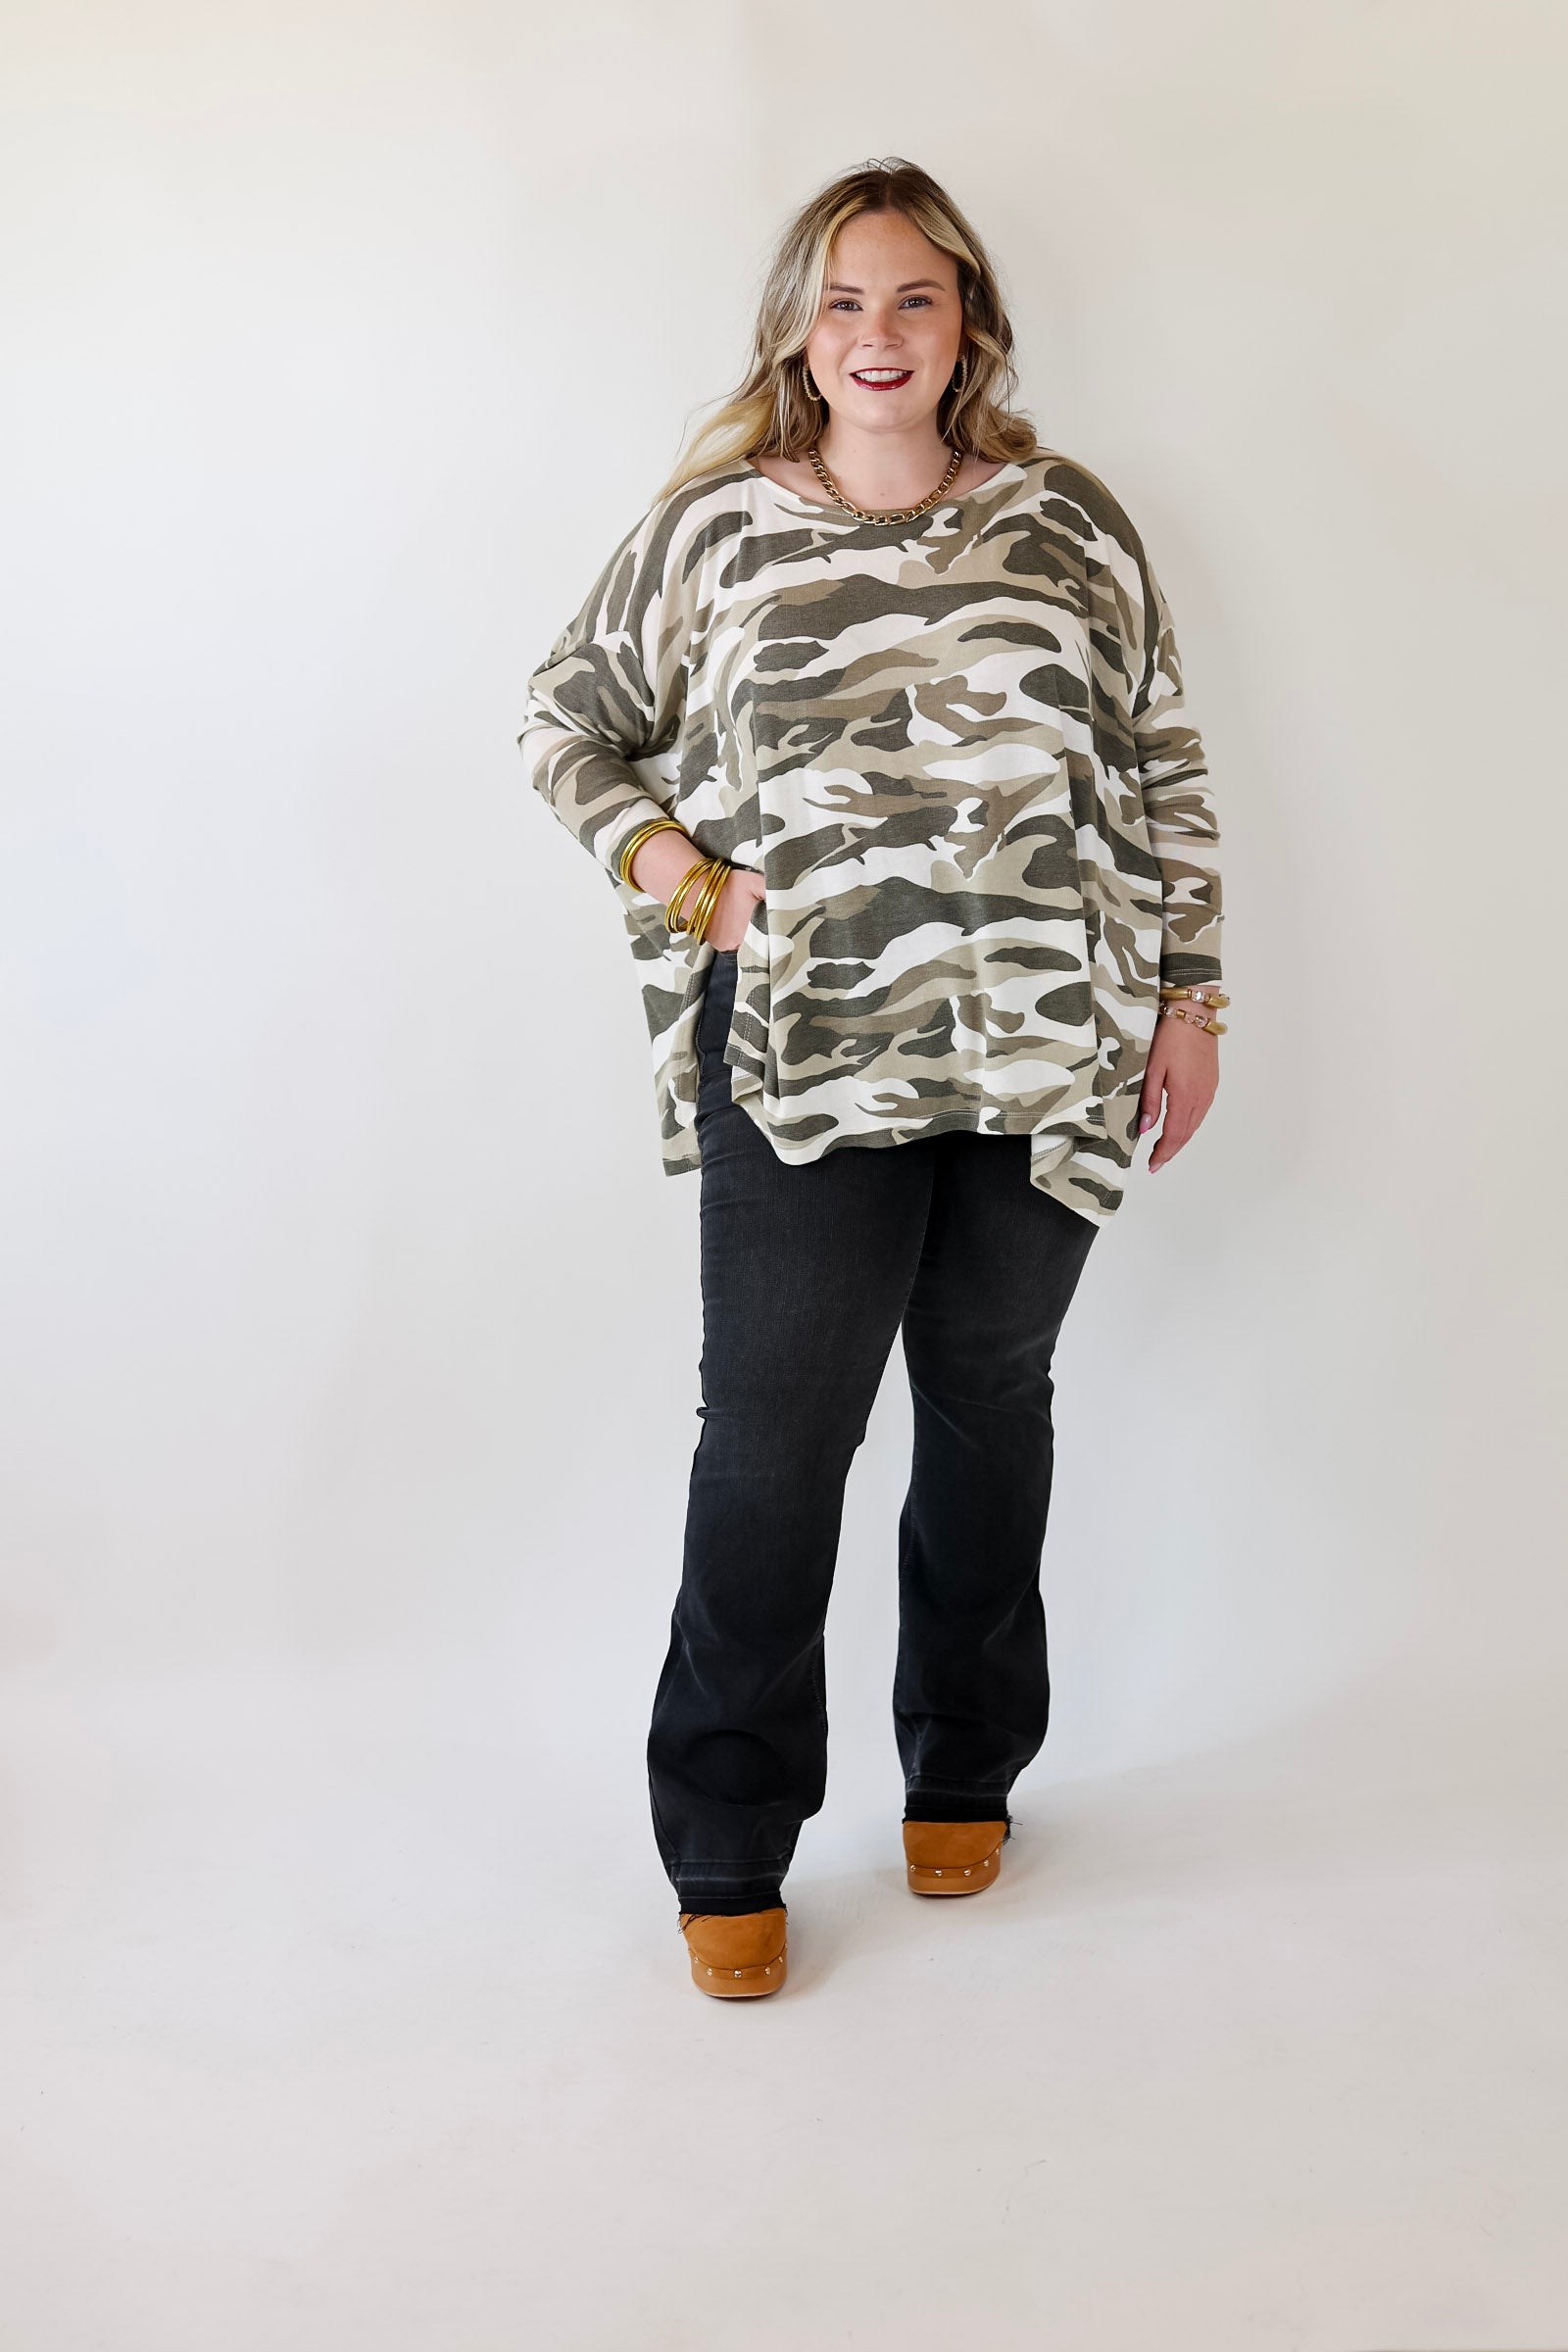 Sidewalk Views Long Sleeve Oversized Shift Top in Camouflage - Giddy Up Glamour Boutique